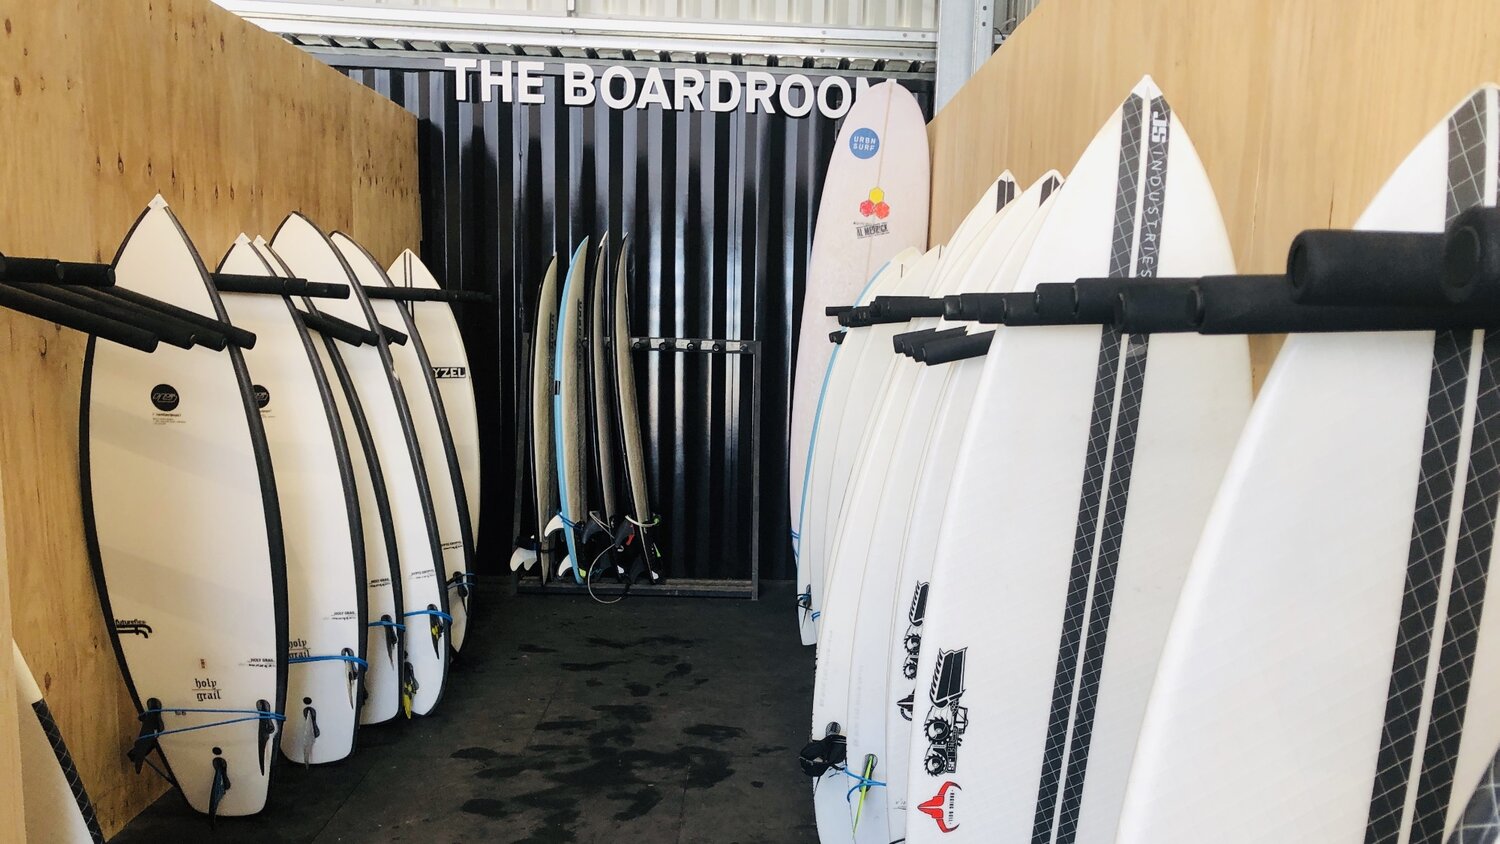 Urbnsurf has received good marks for their surfboard hire selection from some of the biggest named boardbuilders in Australia.